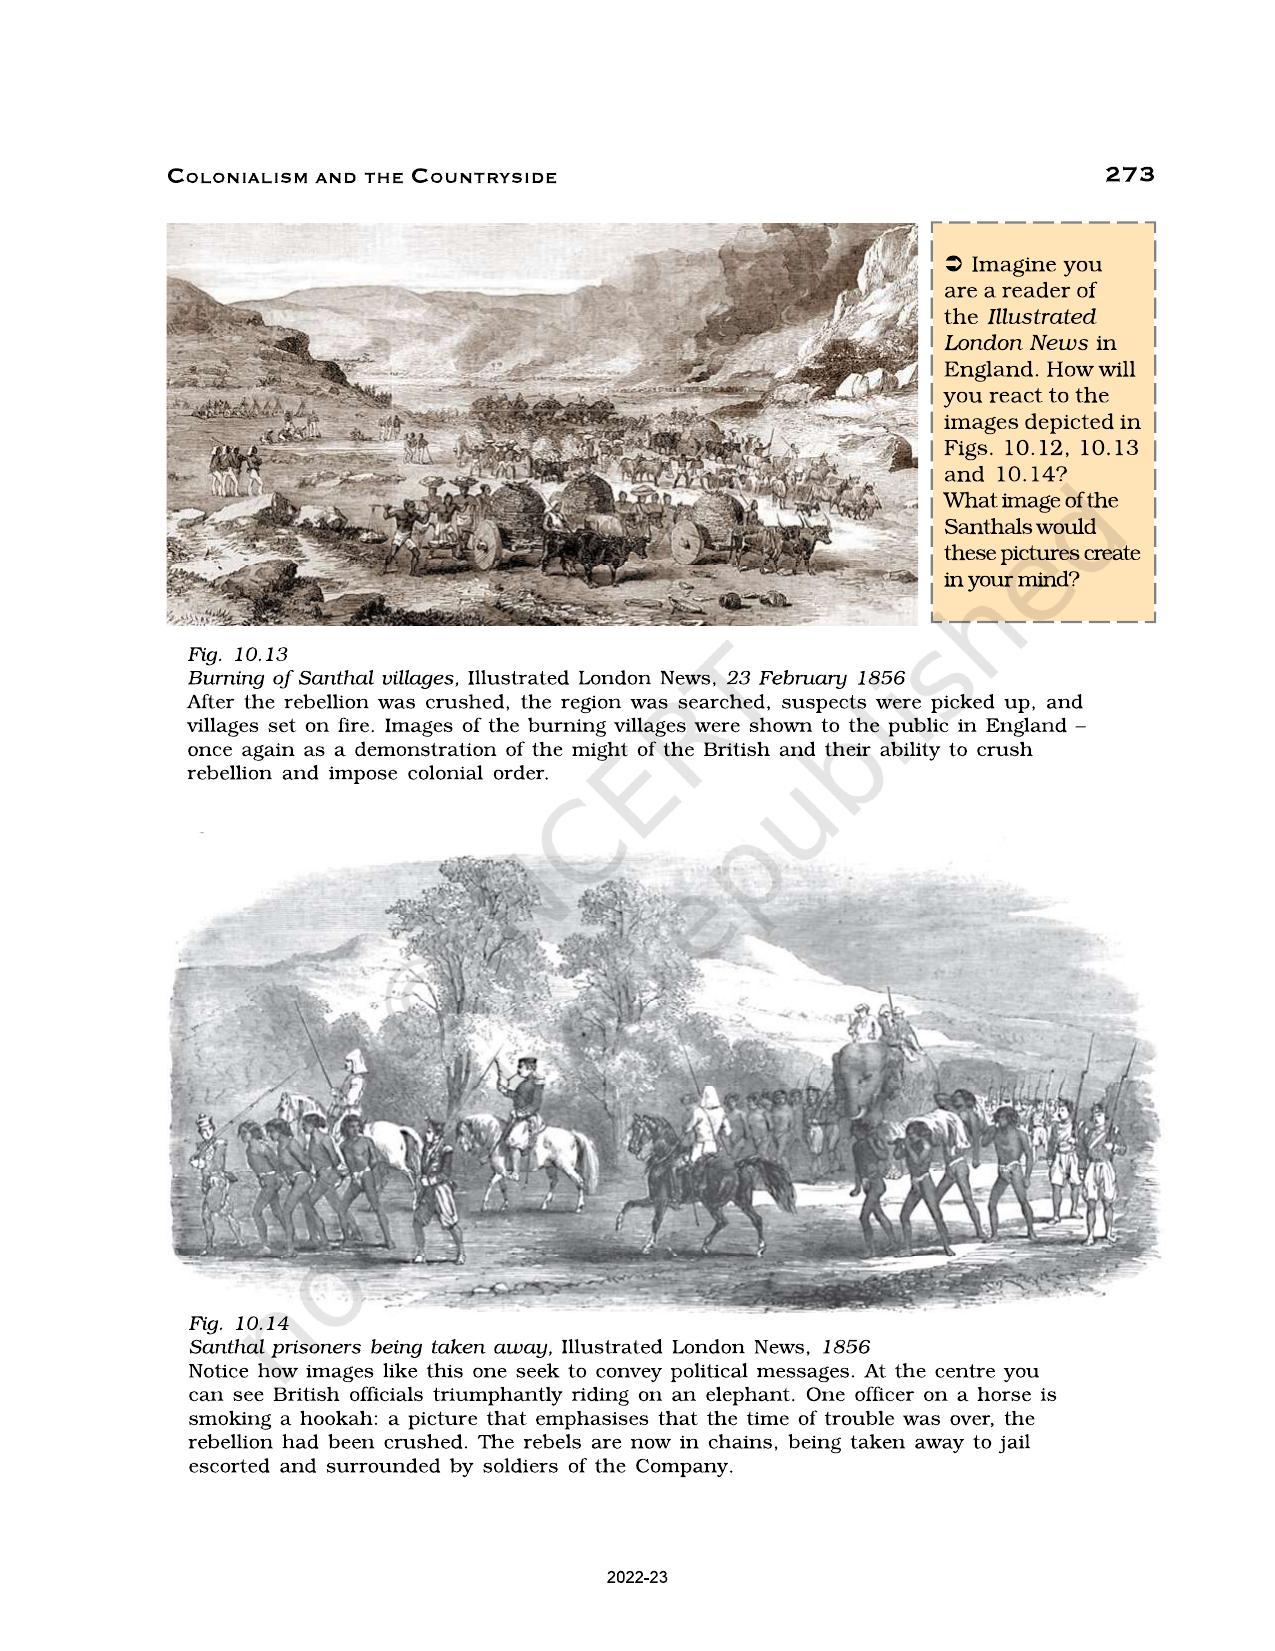 NCERT Book for Class 12 History (Part-II) Chapter 10 Colonialism and the Countryside - Page 17